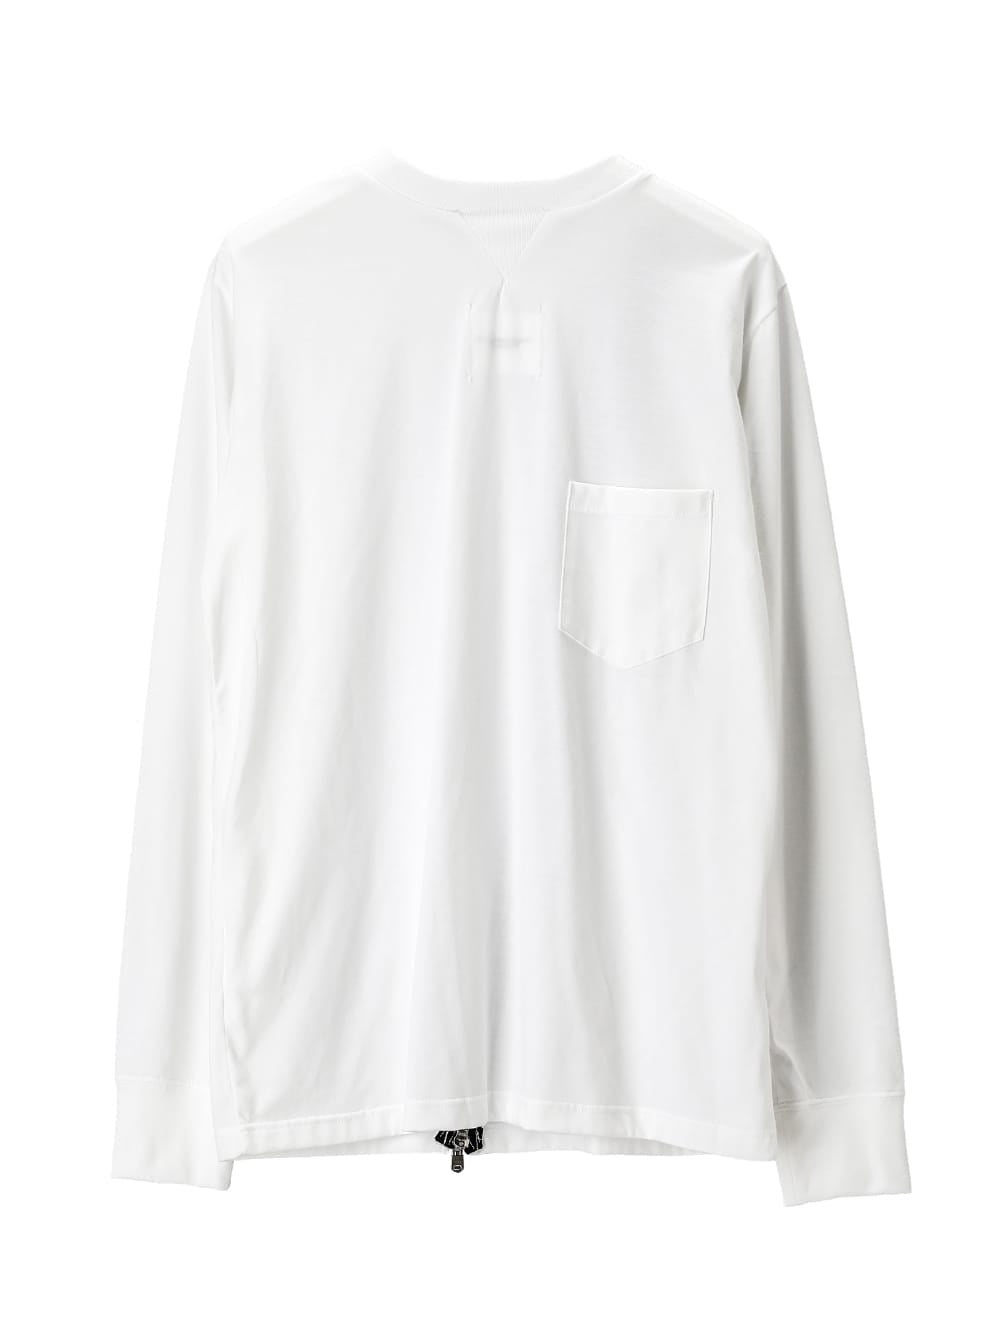 new two-way zip reverse l/s t.(Jersey)(solid)